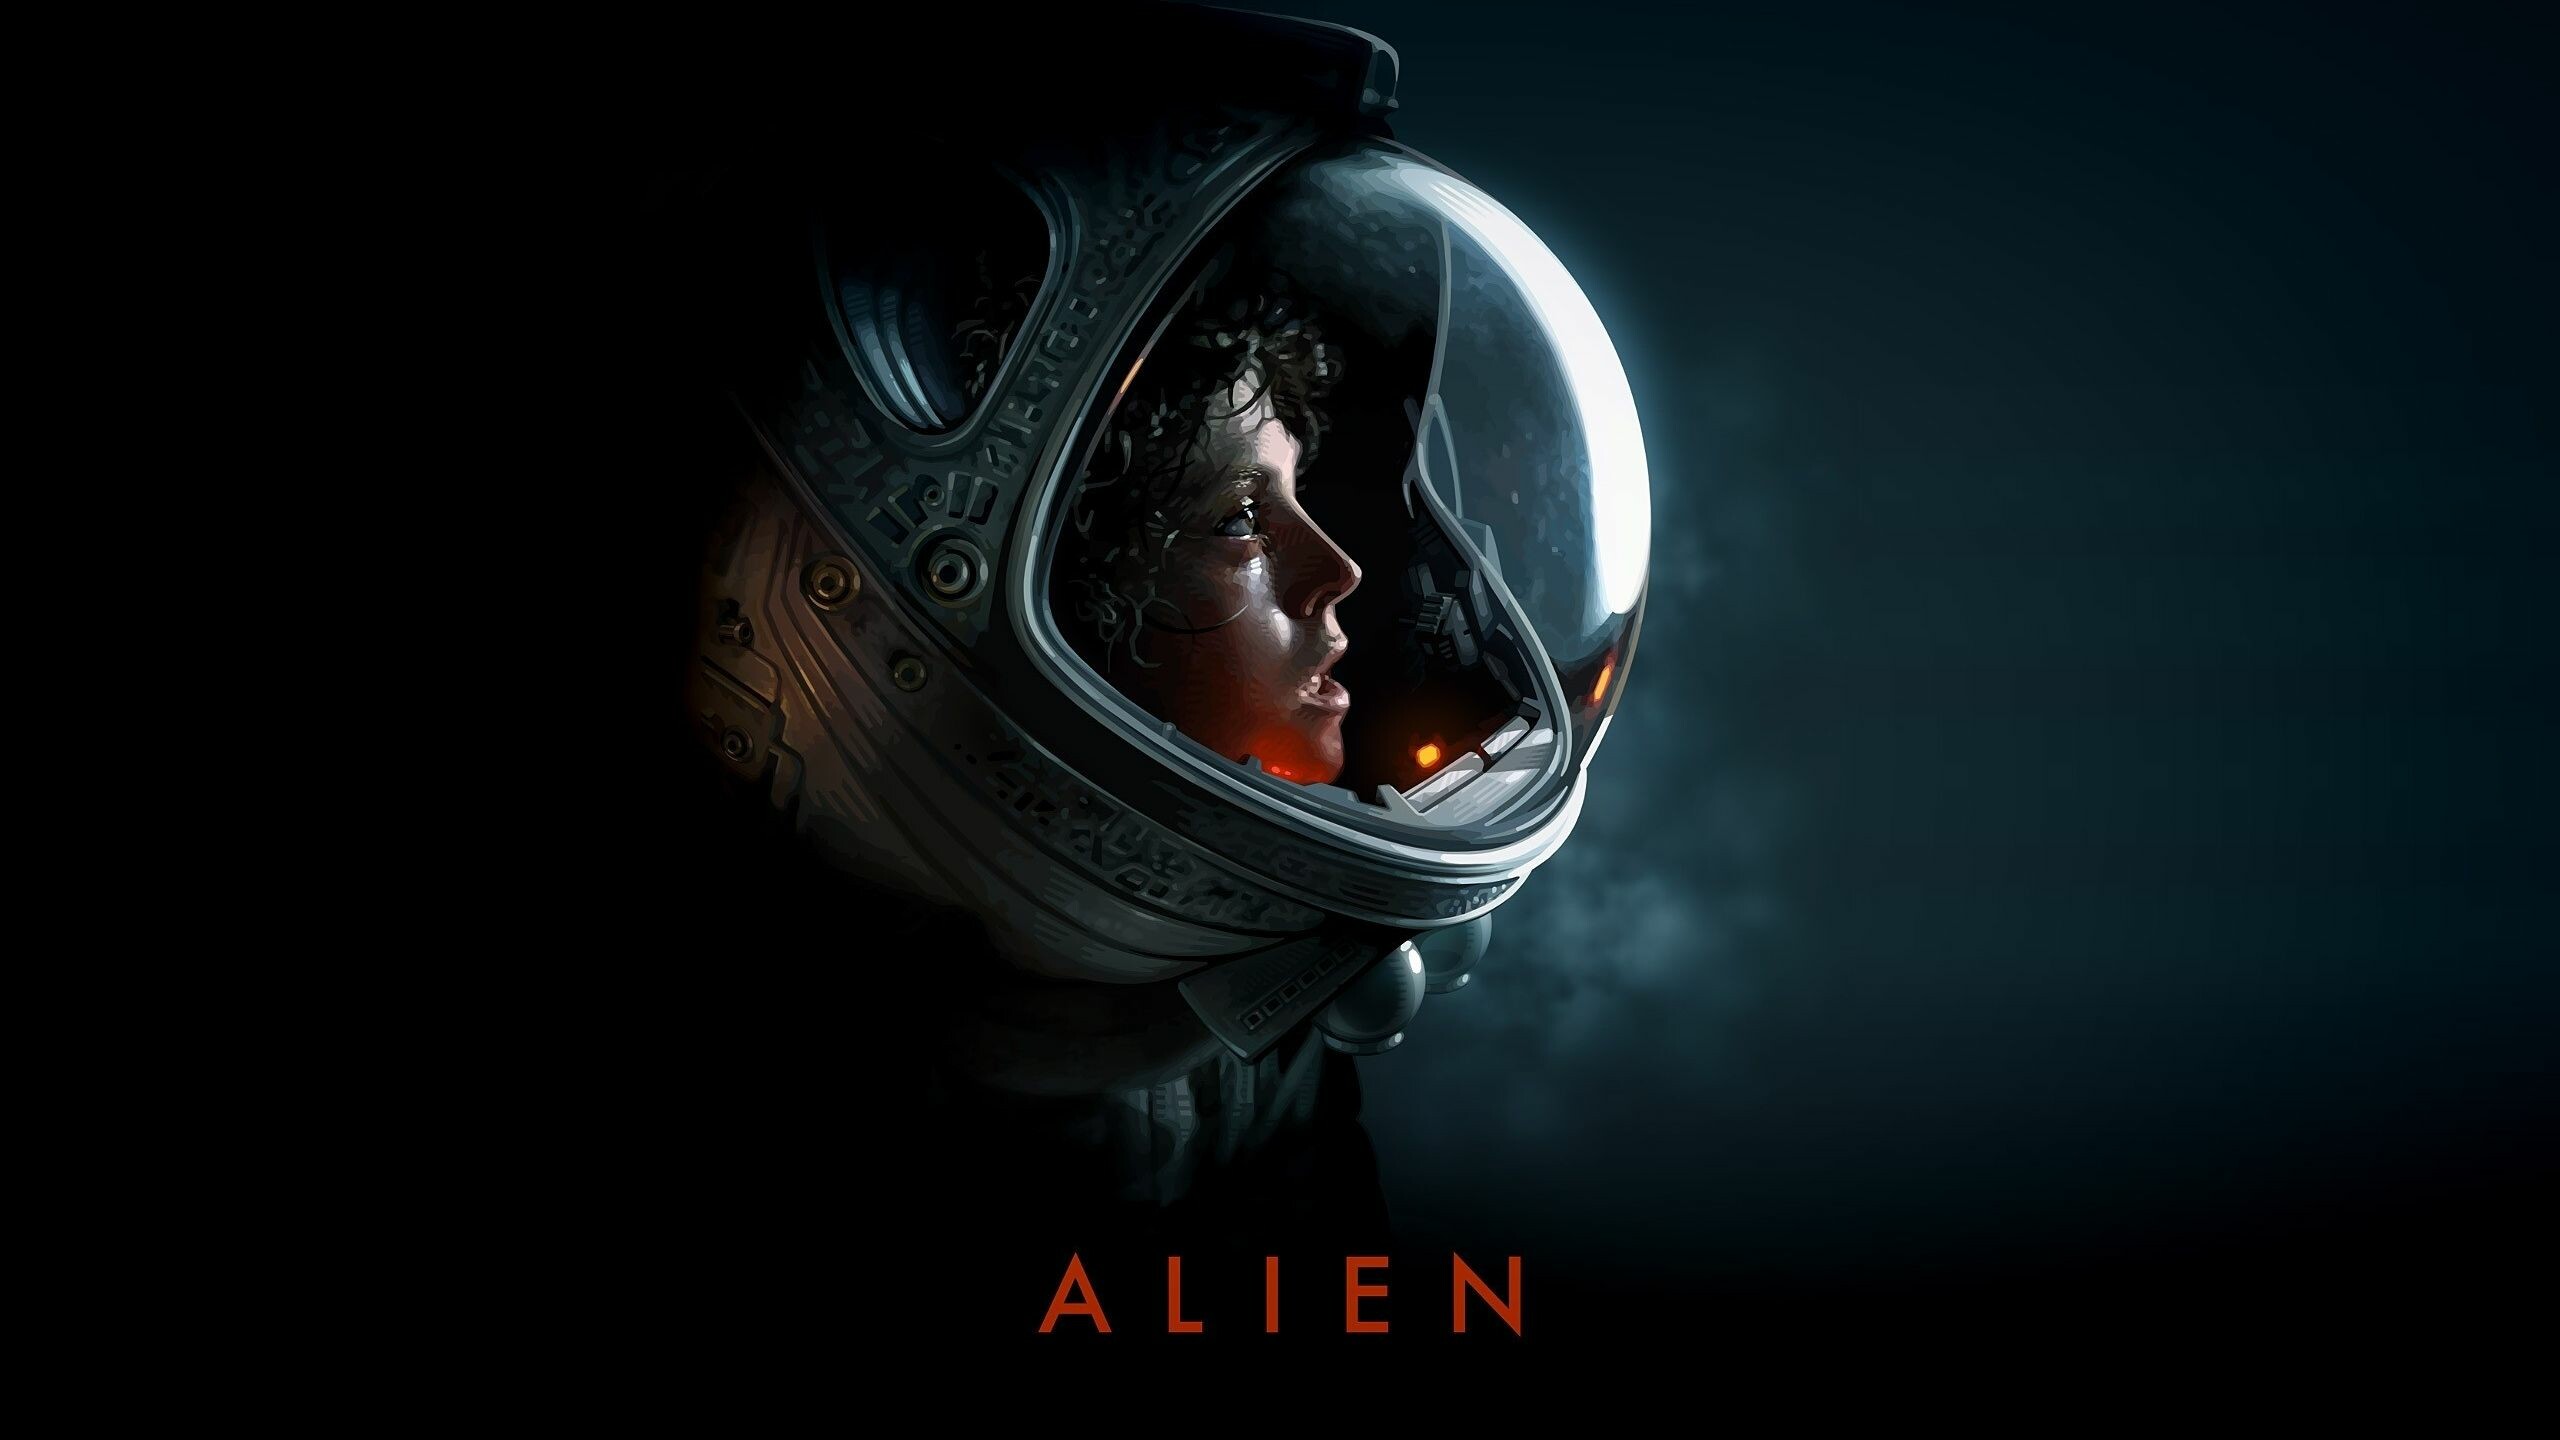 38+ Alien Movie Wallpapers: HD, 4K, 5K for PC and Mobile | Download free  images for iPhone, Android